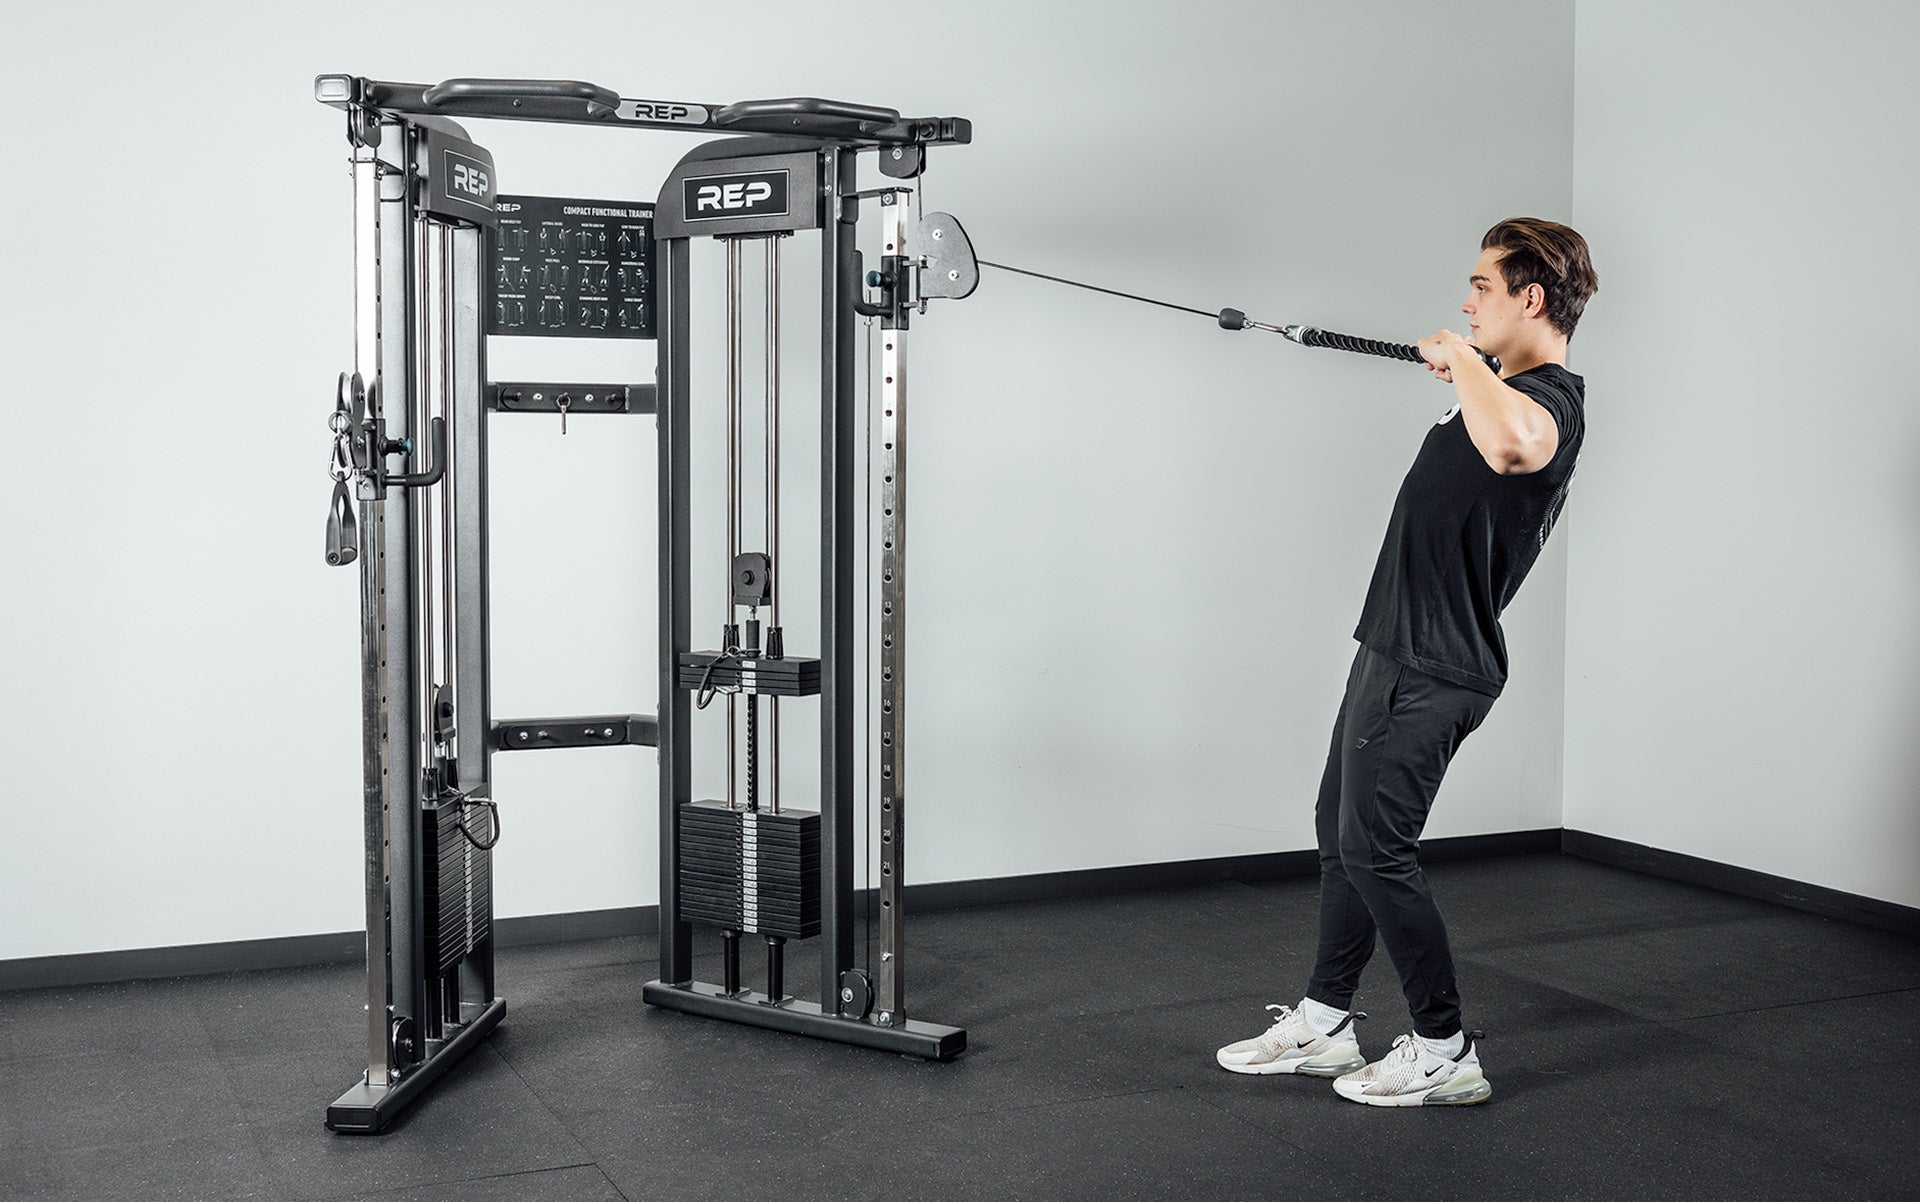 FT-3000 Compact Functional Trainer 2.0